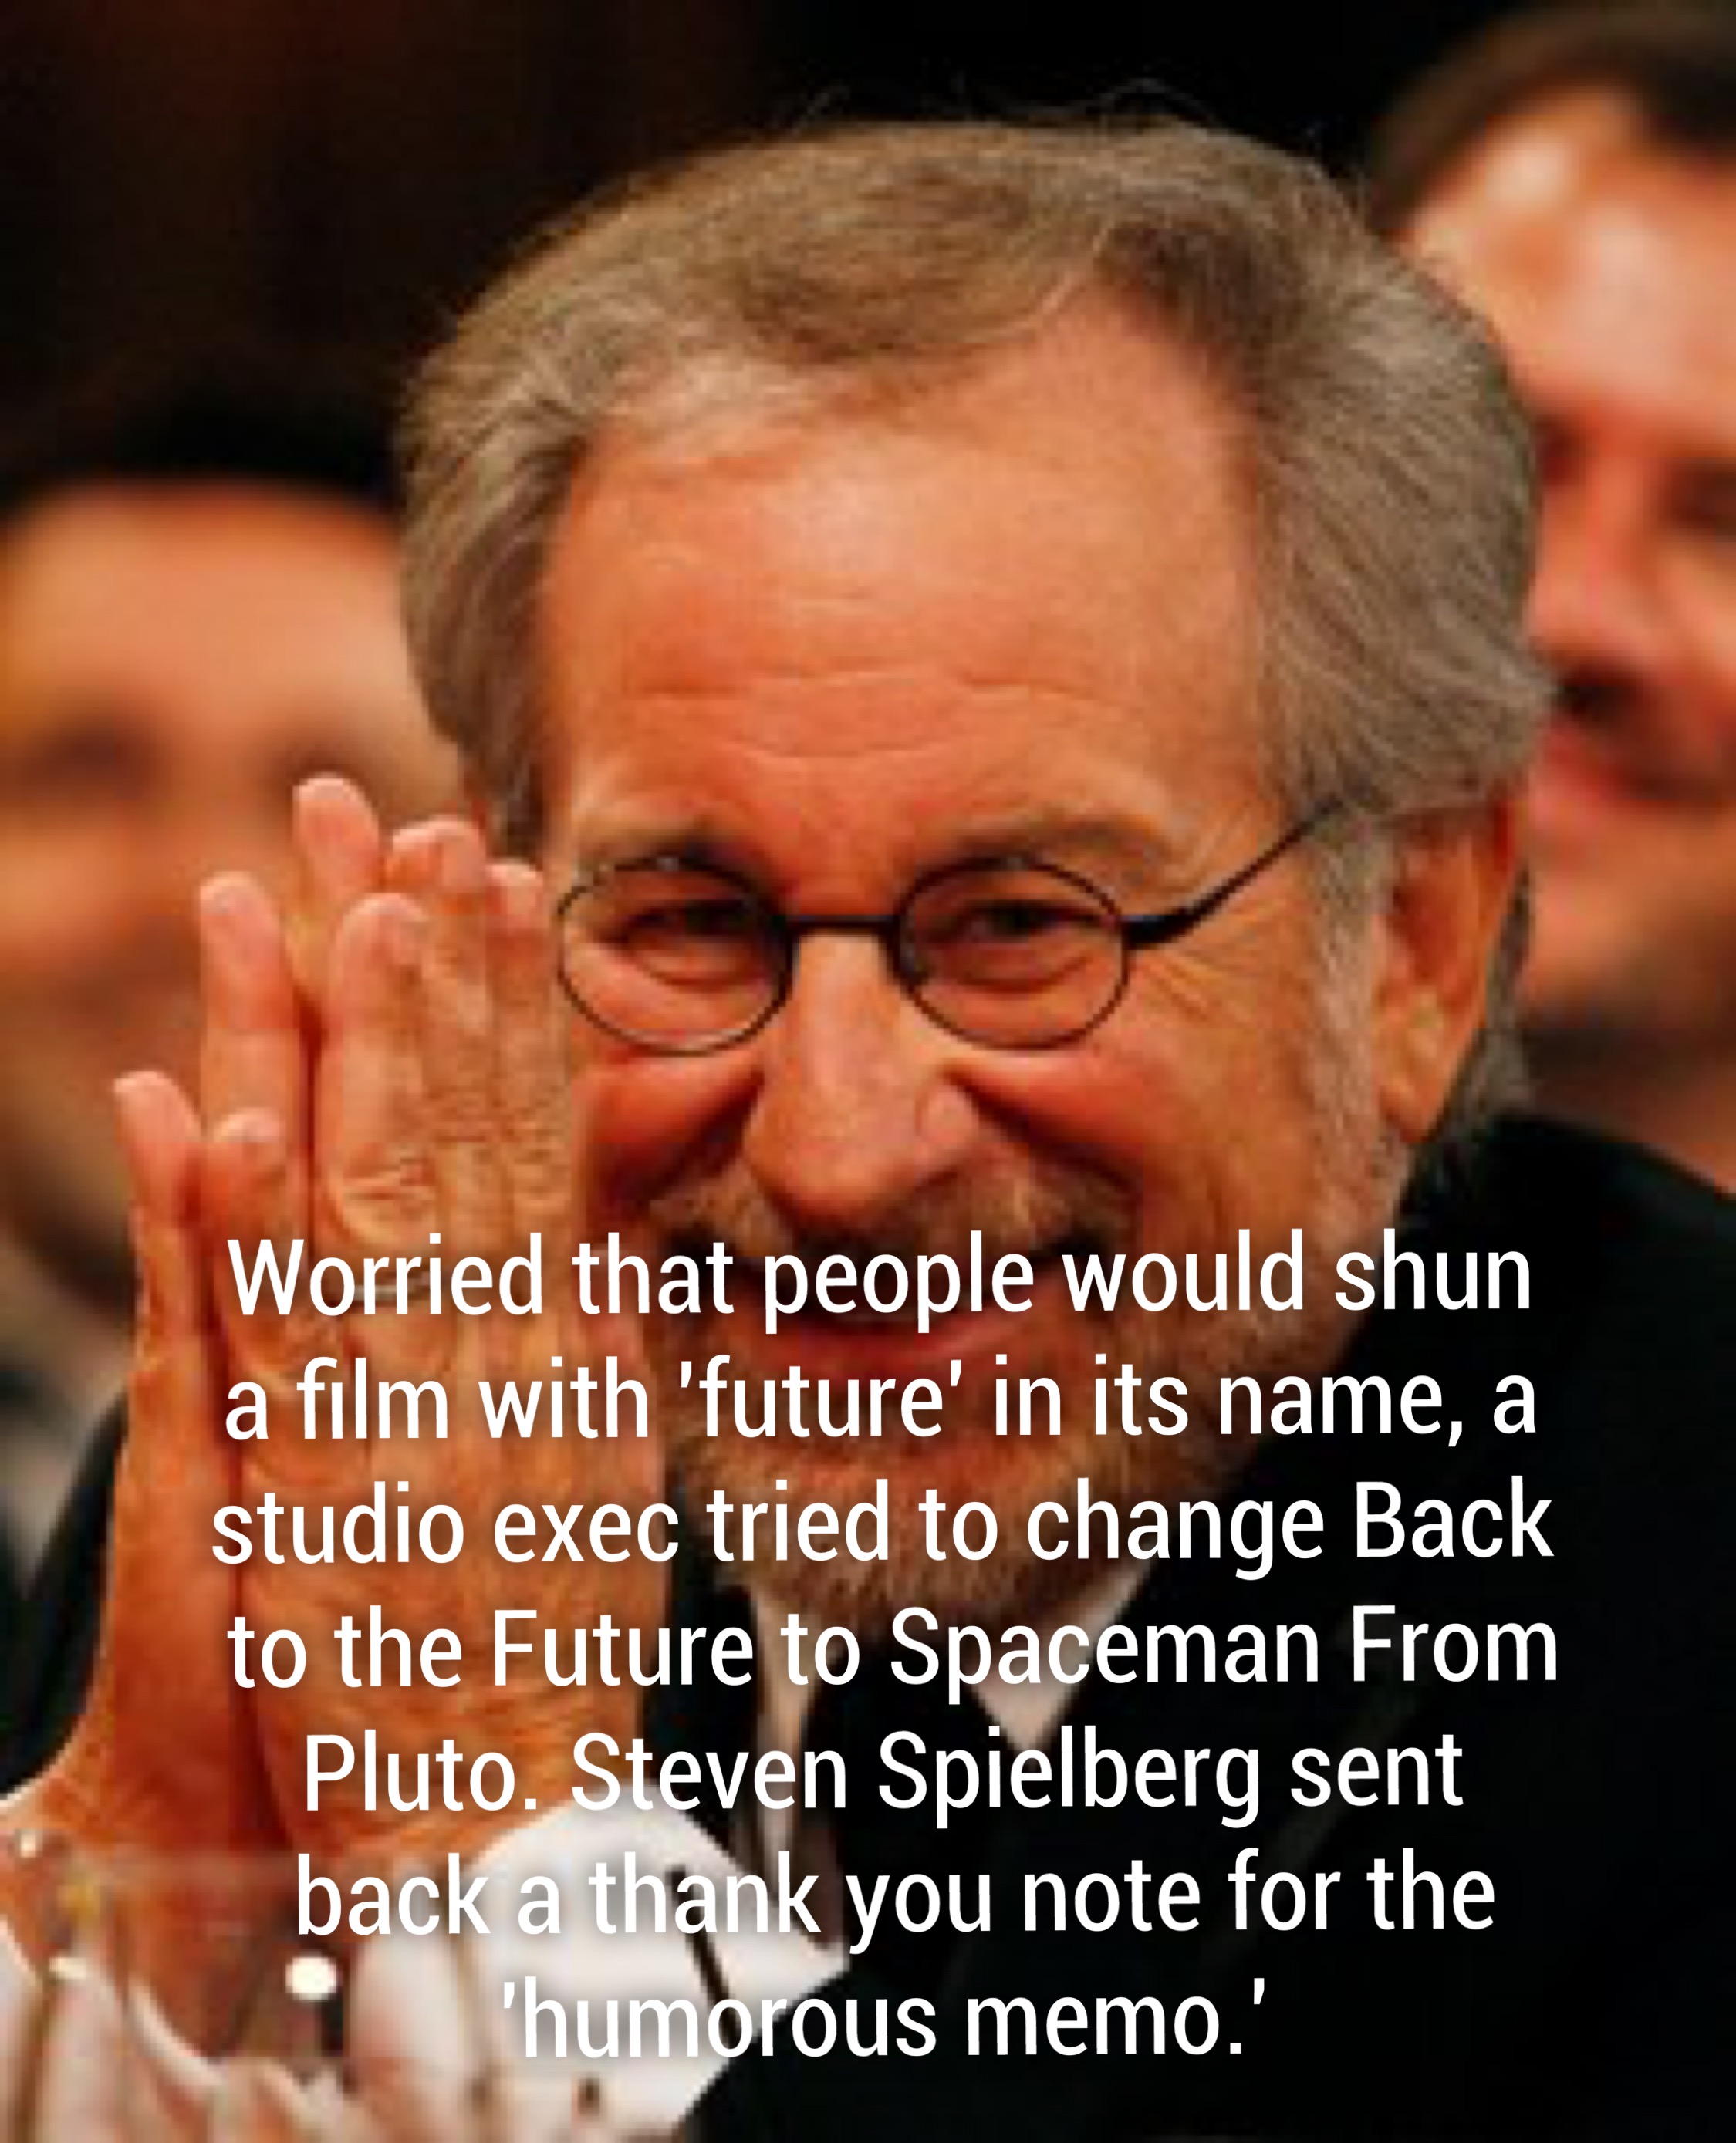 senior citizen - Worried that people would shun a film with 'future in its name, a studio exec tried to change Back to the Future to Spaceman From Pluto. Steven Spielberg sent back a thank you note for the 'humorous memo.'